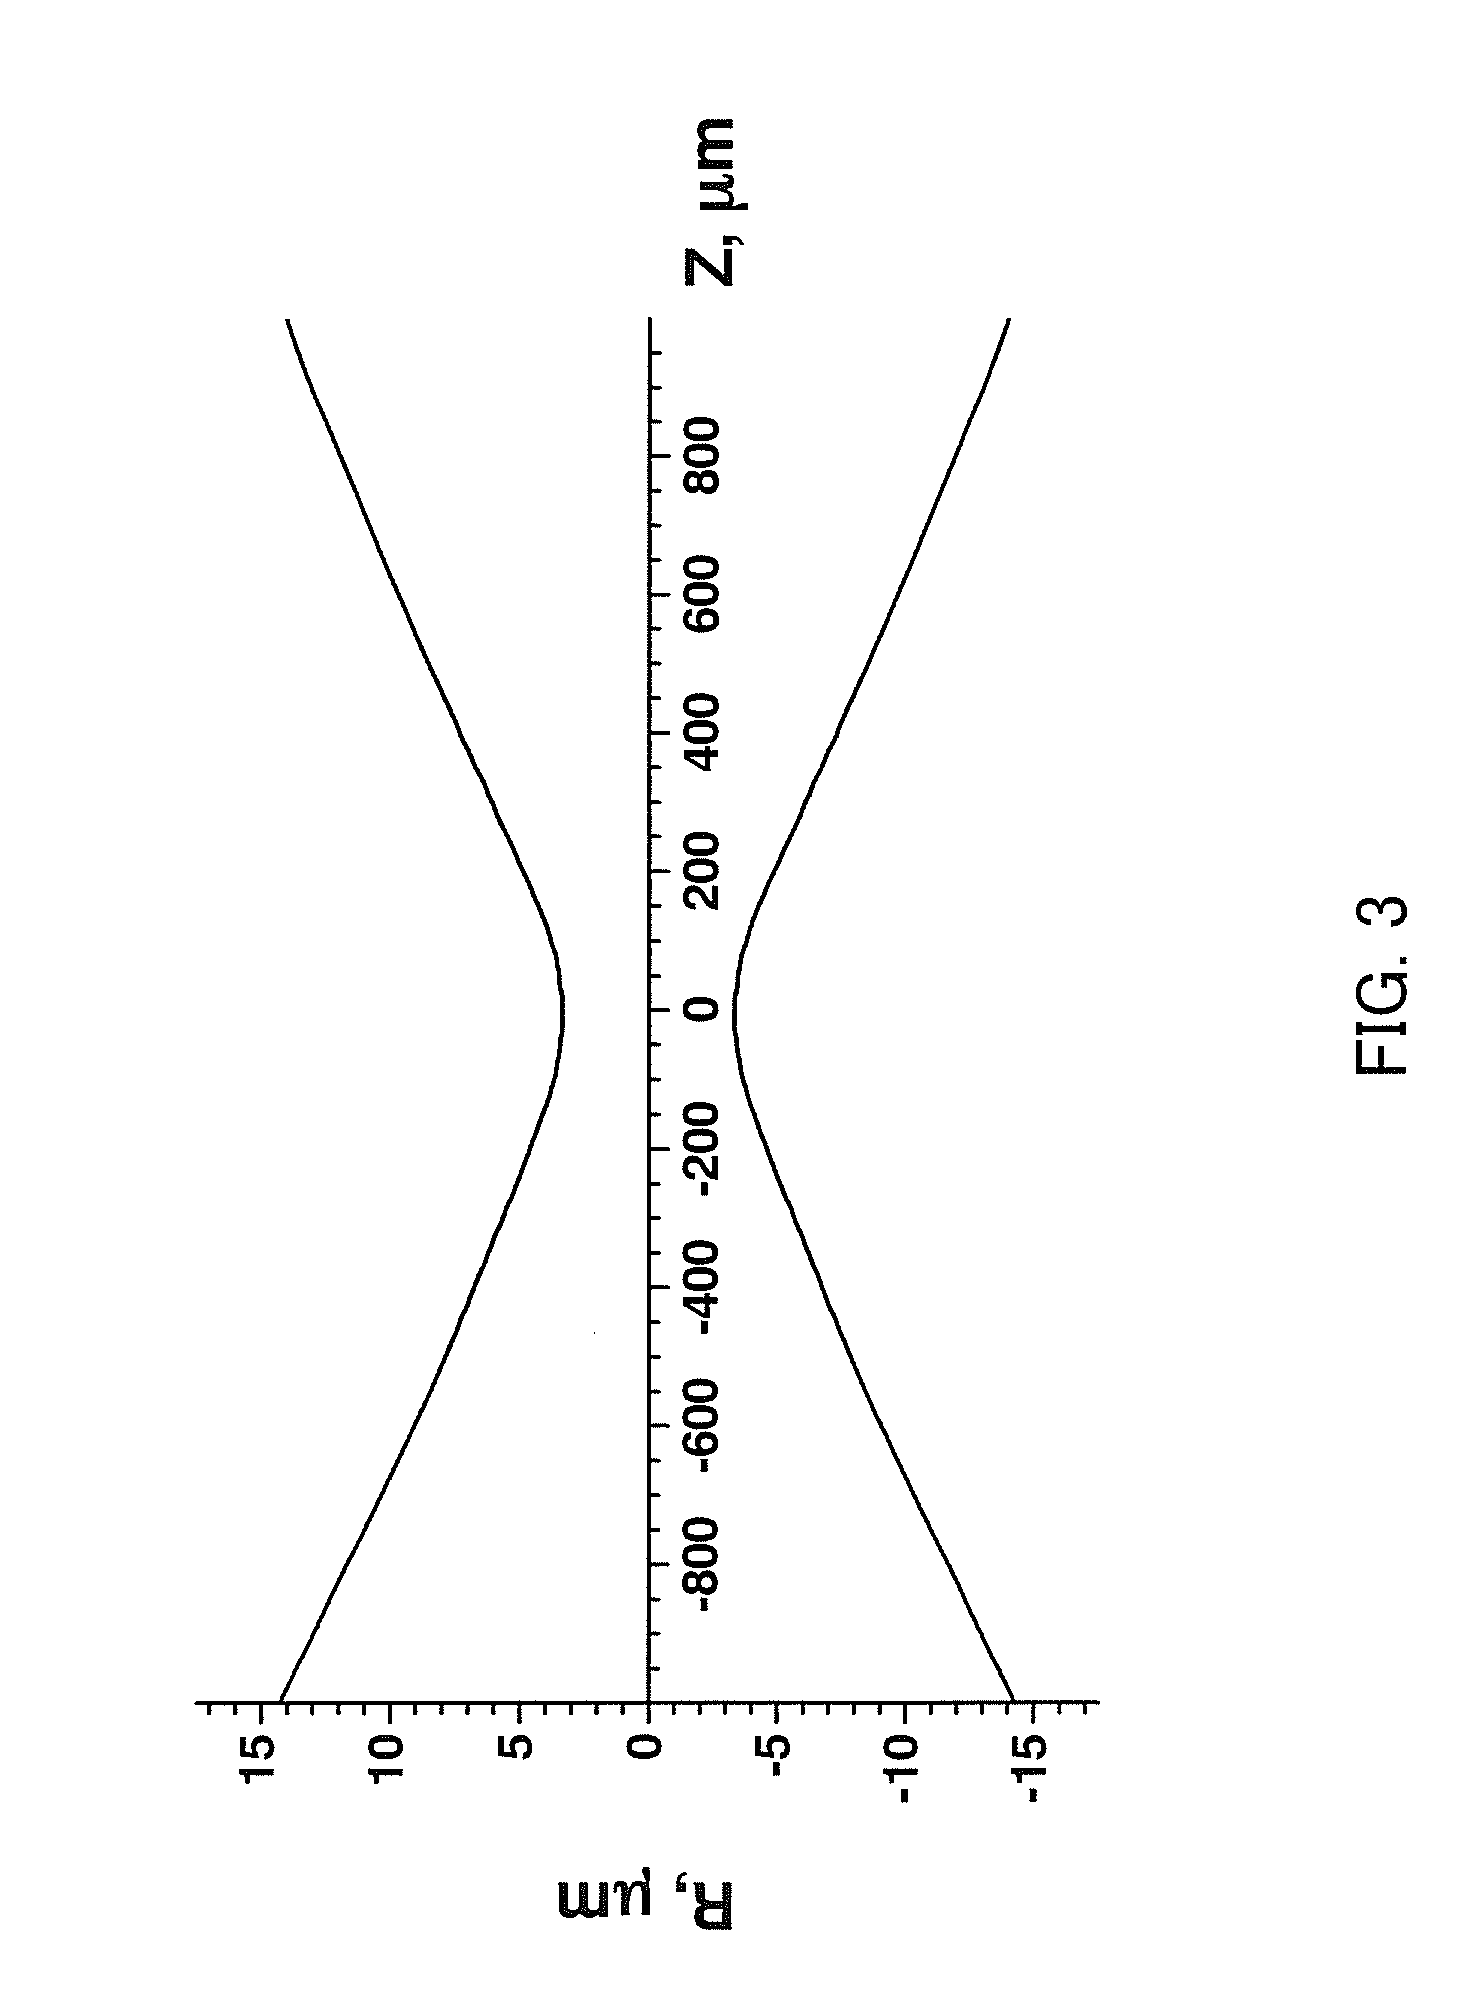 Saturable Absorber of Polyimide Containing Dispersed Carbon Nanotubes